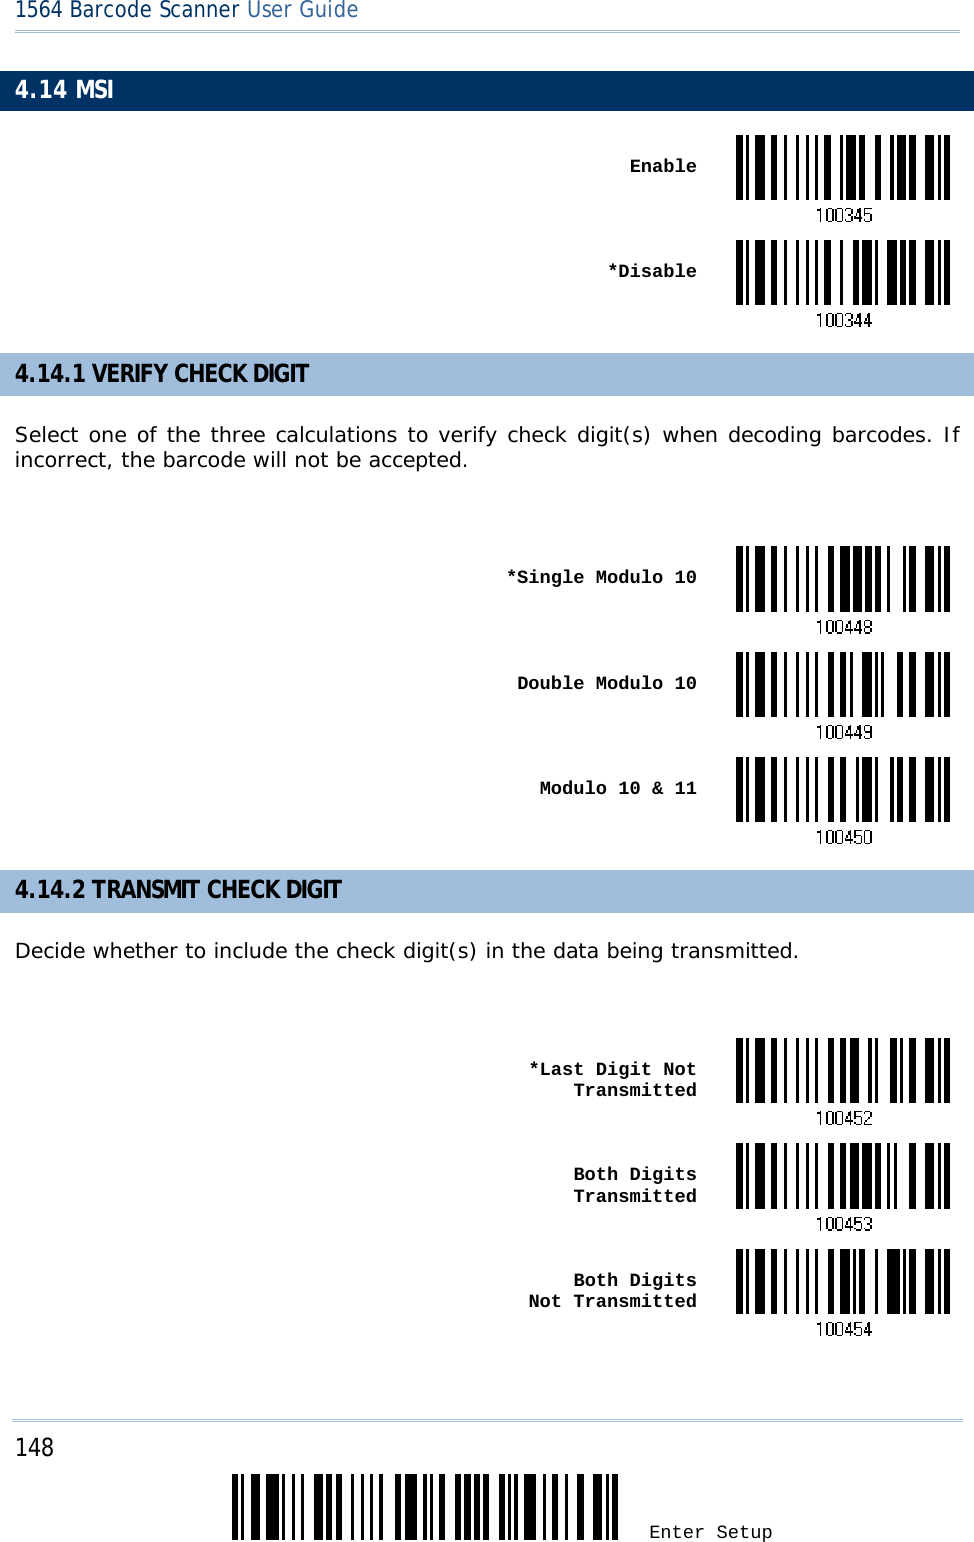 148 Enter Setup 1564 Barcode Scanner User Guide  4.14 MSI  Enable *Disable4.14.1 VERIFY CHECK DIGIT Select one of the three calculations to verify check digit(s) when decoding barcodes. If incorrect, the barcode will not be accepted.   *Single Modulo 10 Double Modulo 10 Modulo 10 &amp; 114.14.2 TRANSMIT CHECK DIGIT Decide whether to include the check digit(s) in the data being transmitted.   *Last Digit Not Transmitted Both Digits Transmitted Both Digits  Not Transmitted